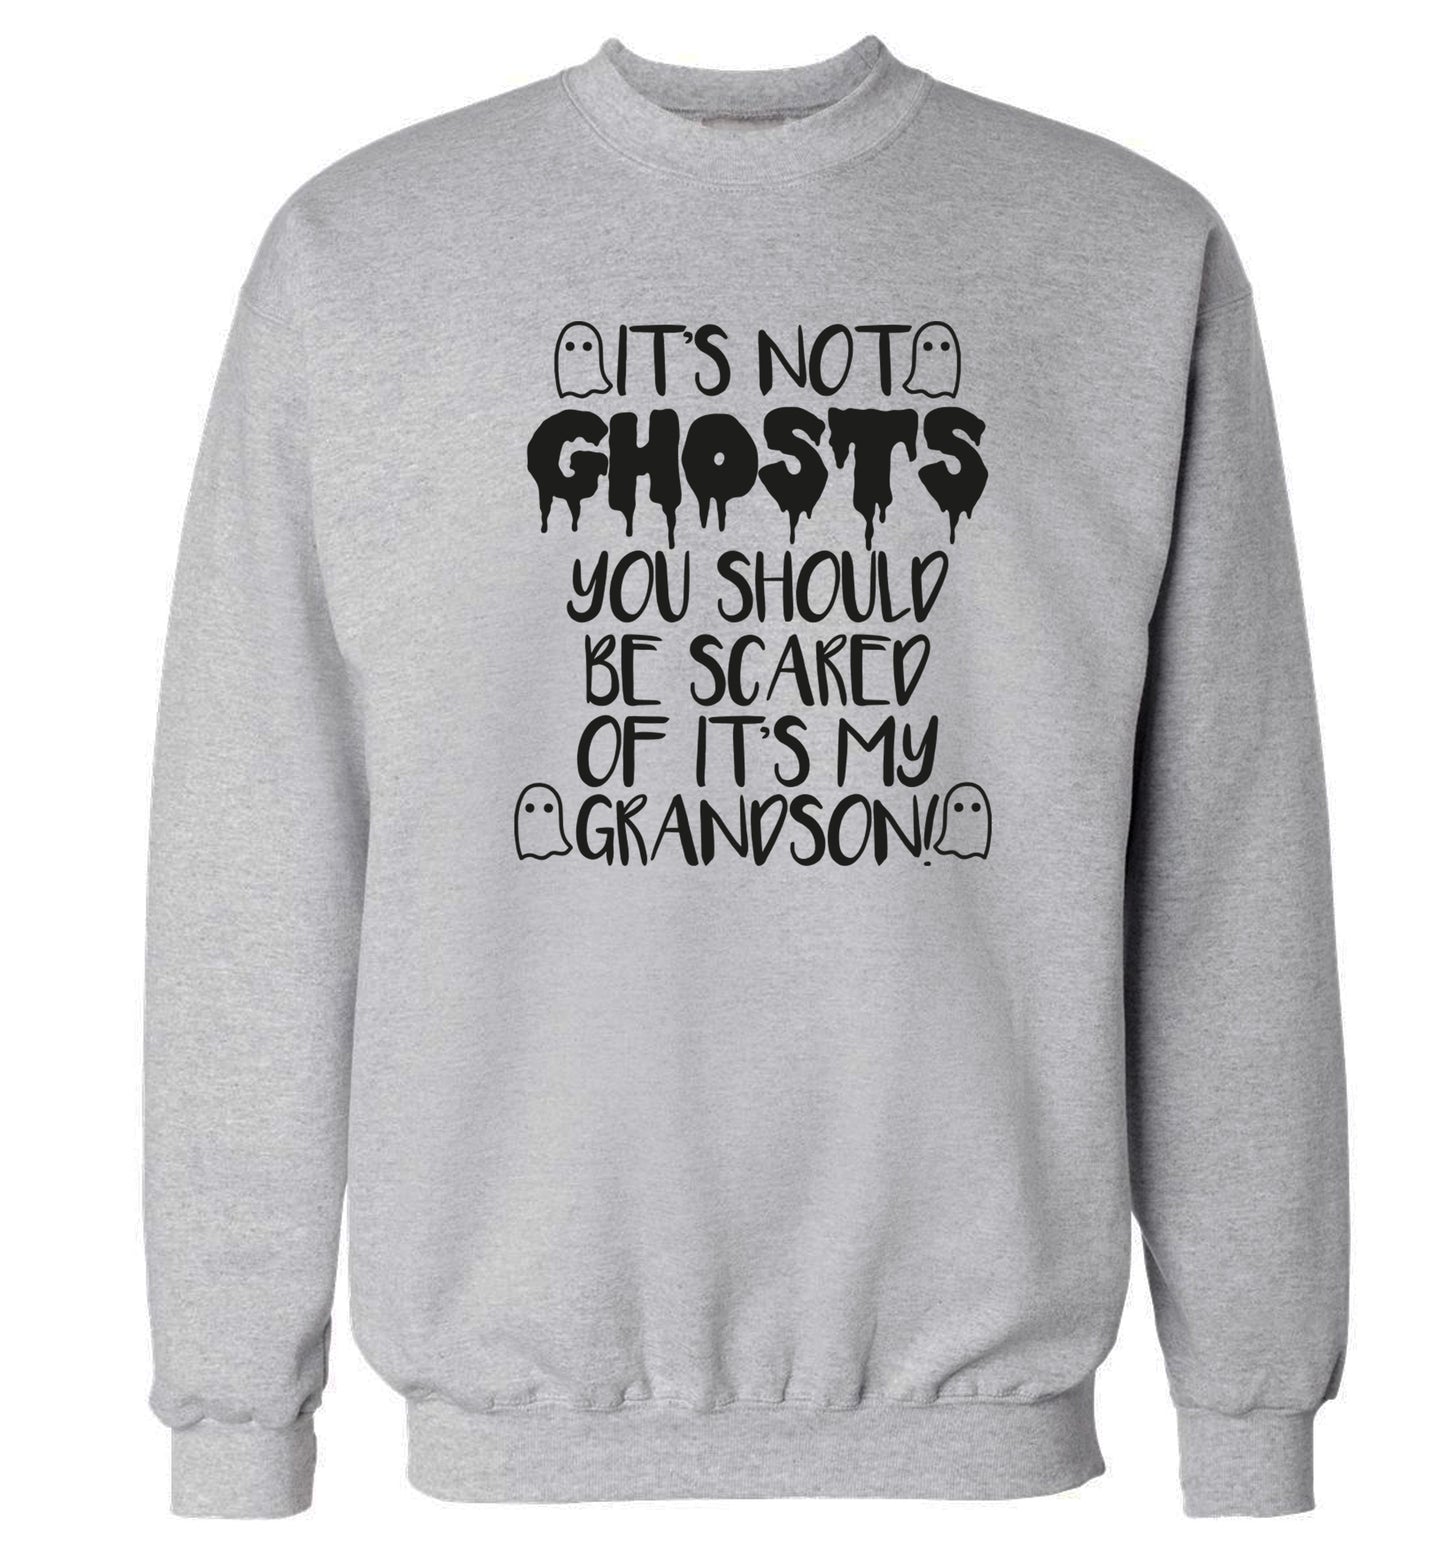 It's not ghosts you should be scared of it's my grandson! Adult's unisex grey Sweater 2XL